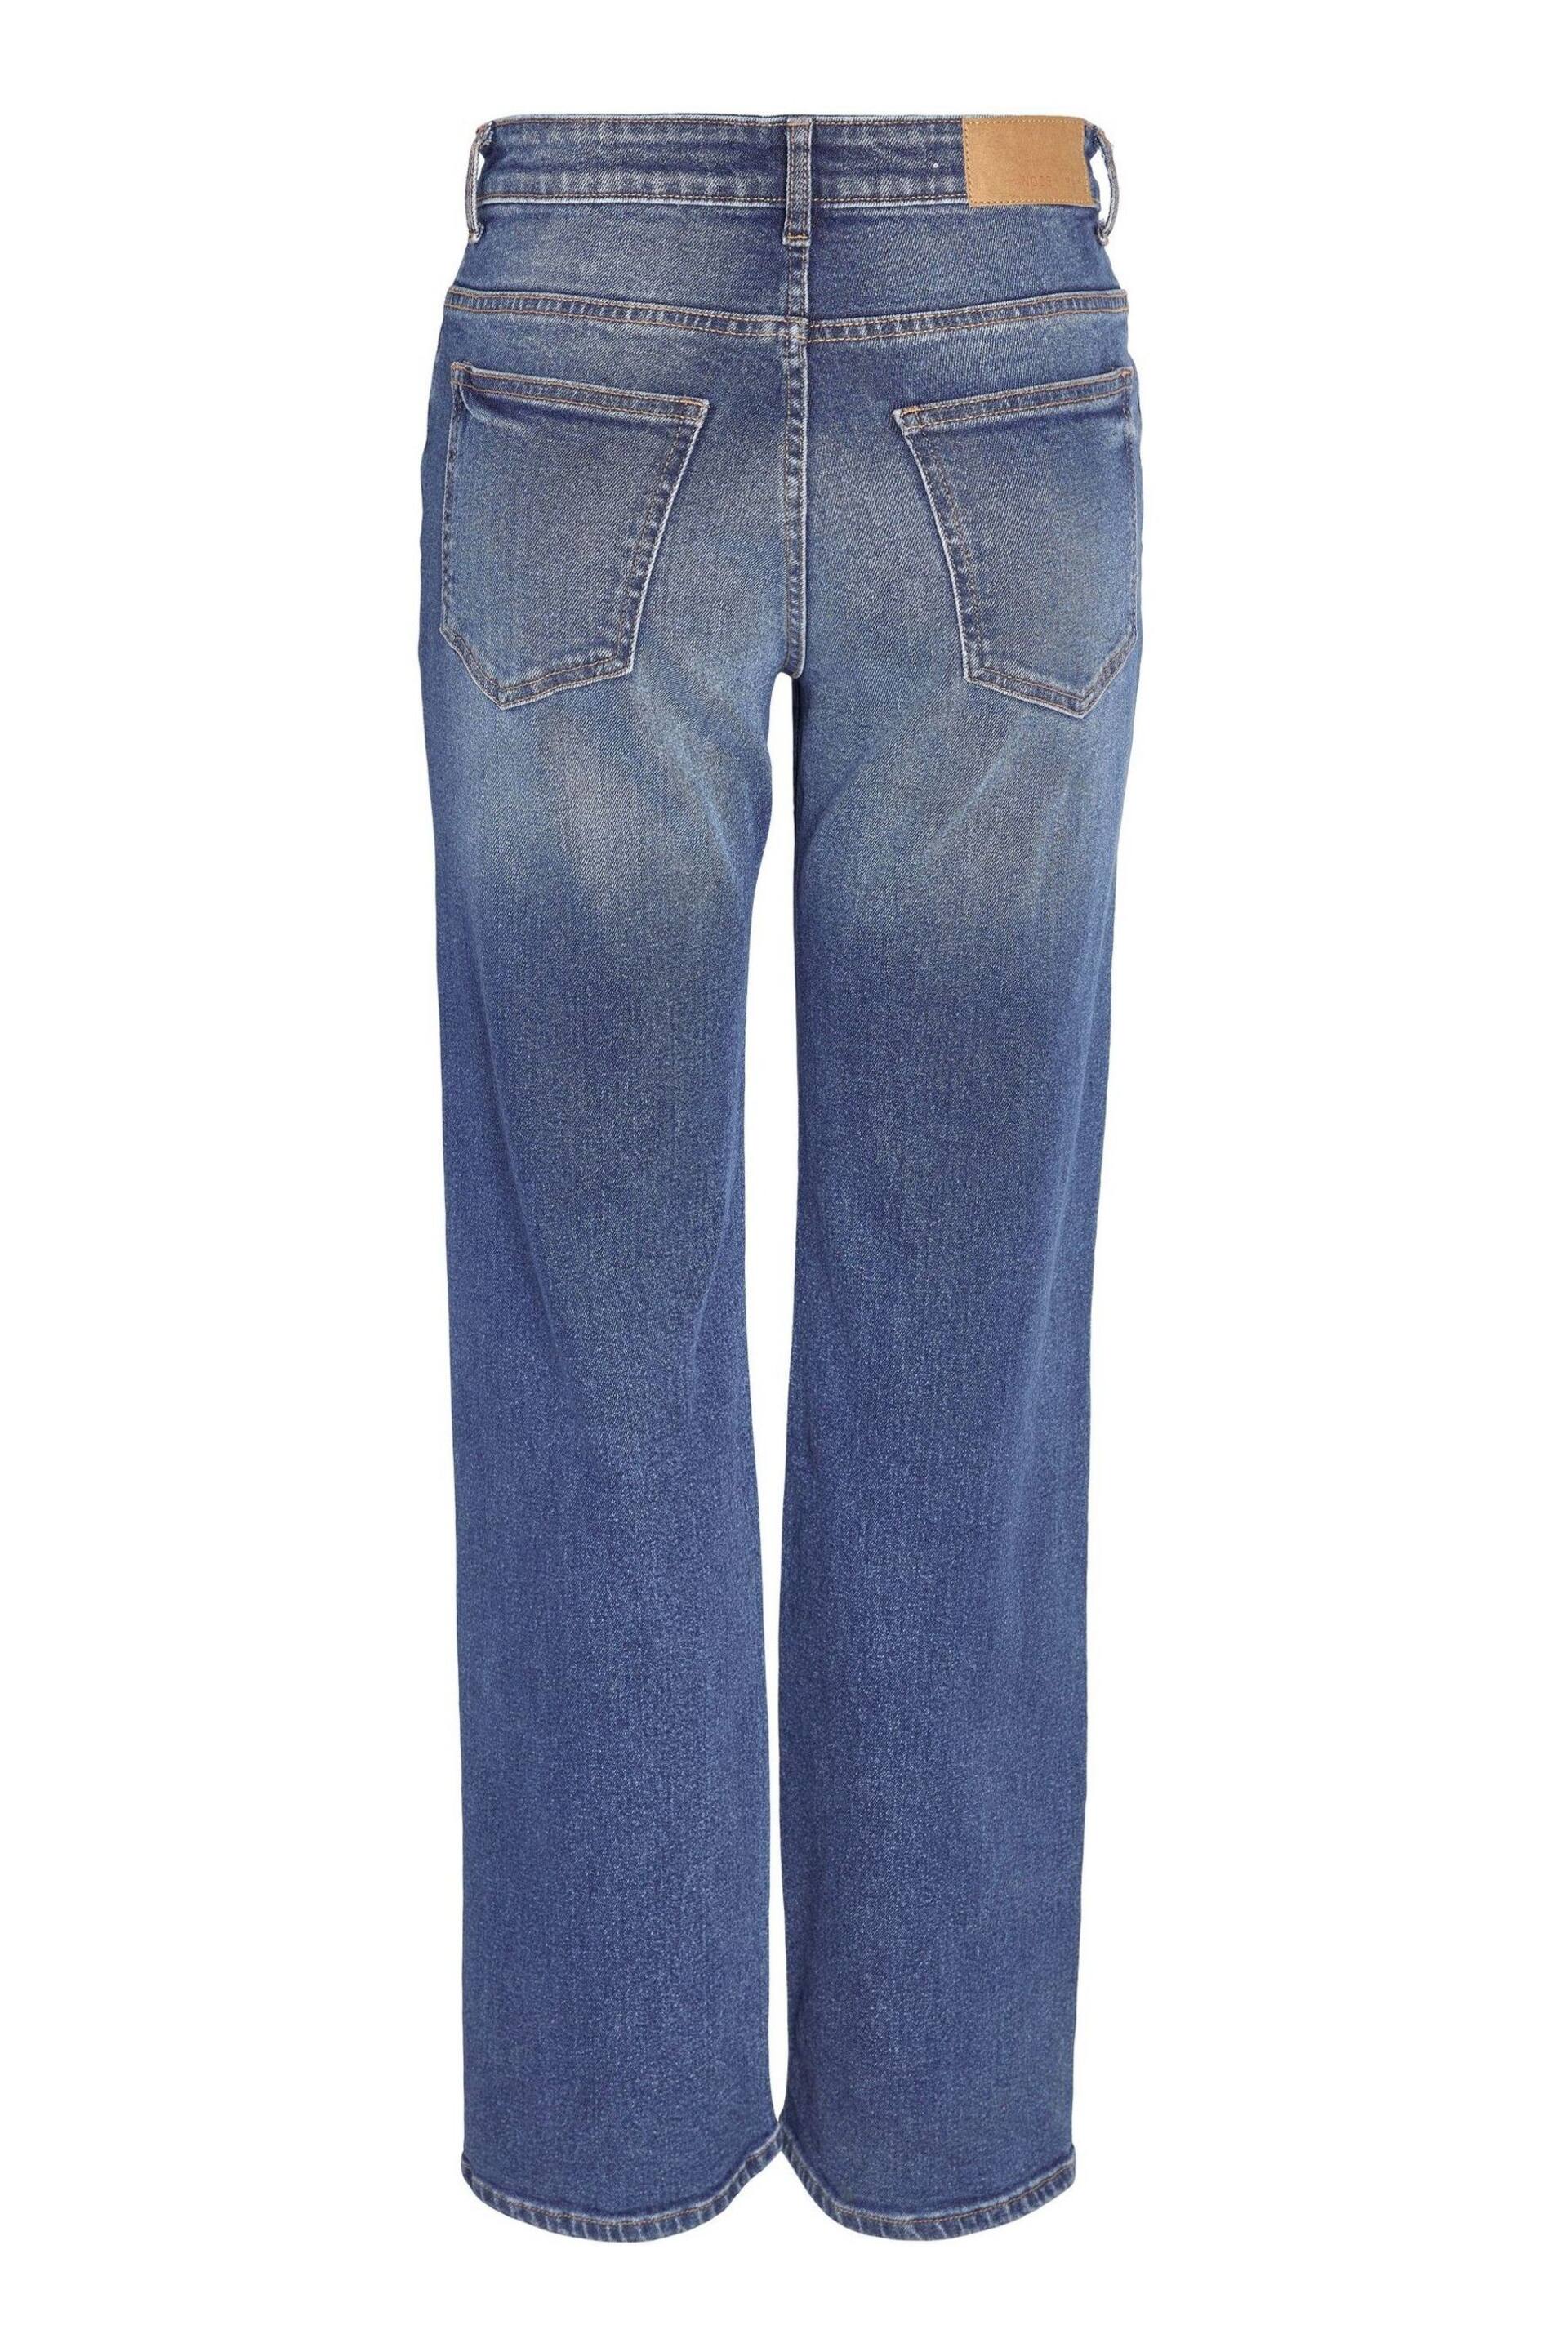 NOISY MAY Blue High Waisted Wide Leg Jeans - Image 8 of 8